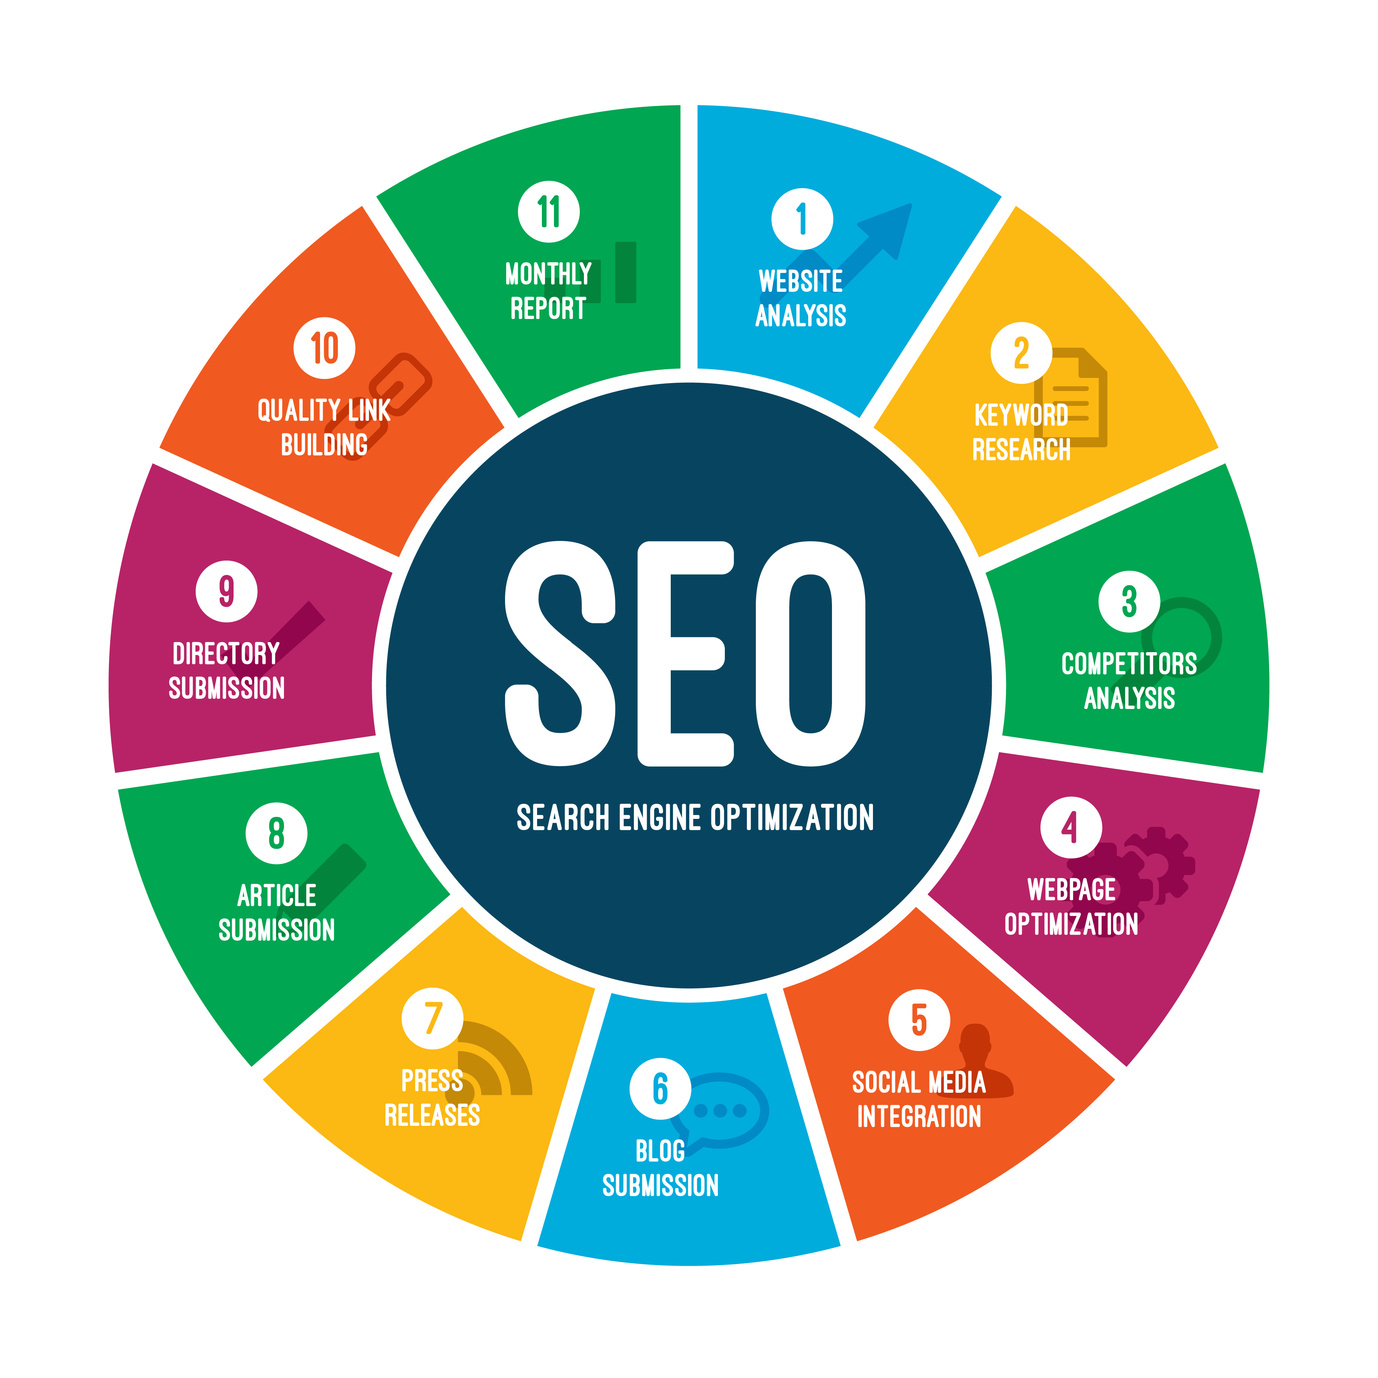 Is Your SEO Strategy Designed for the Long Haul?